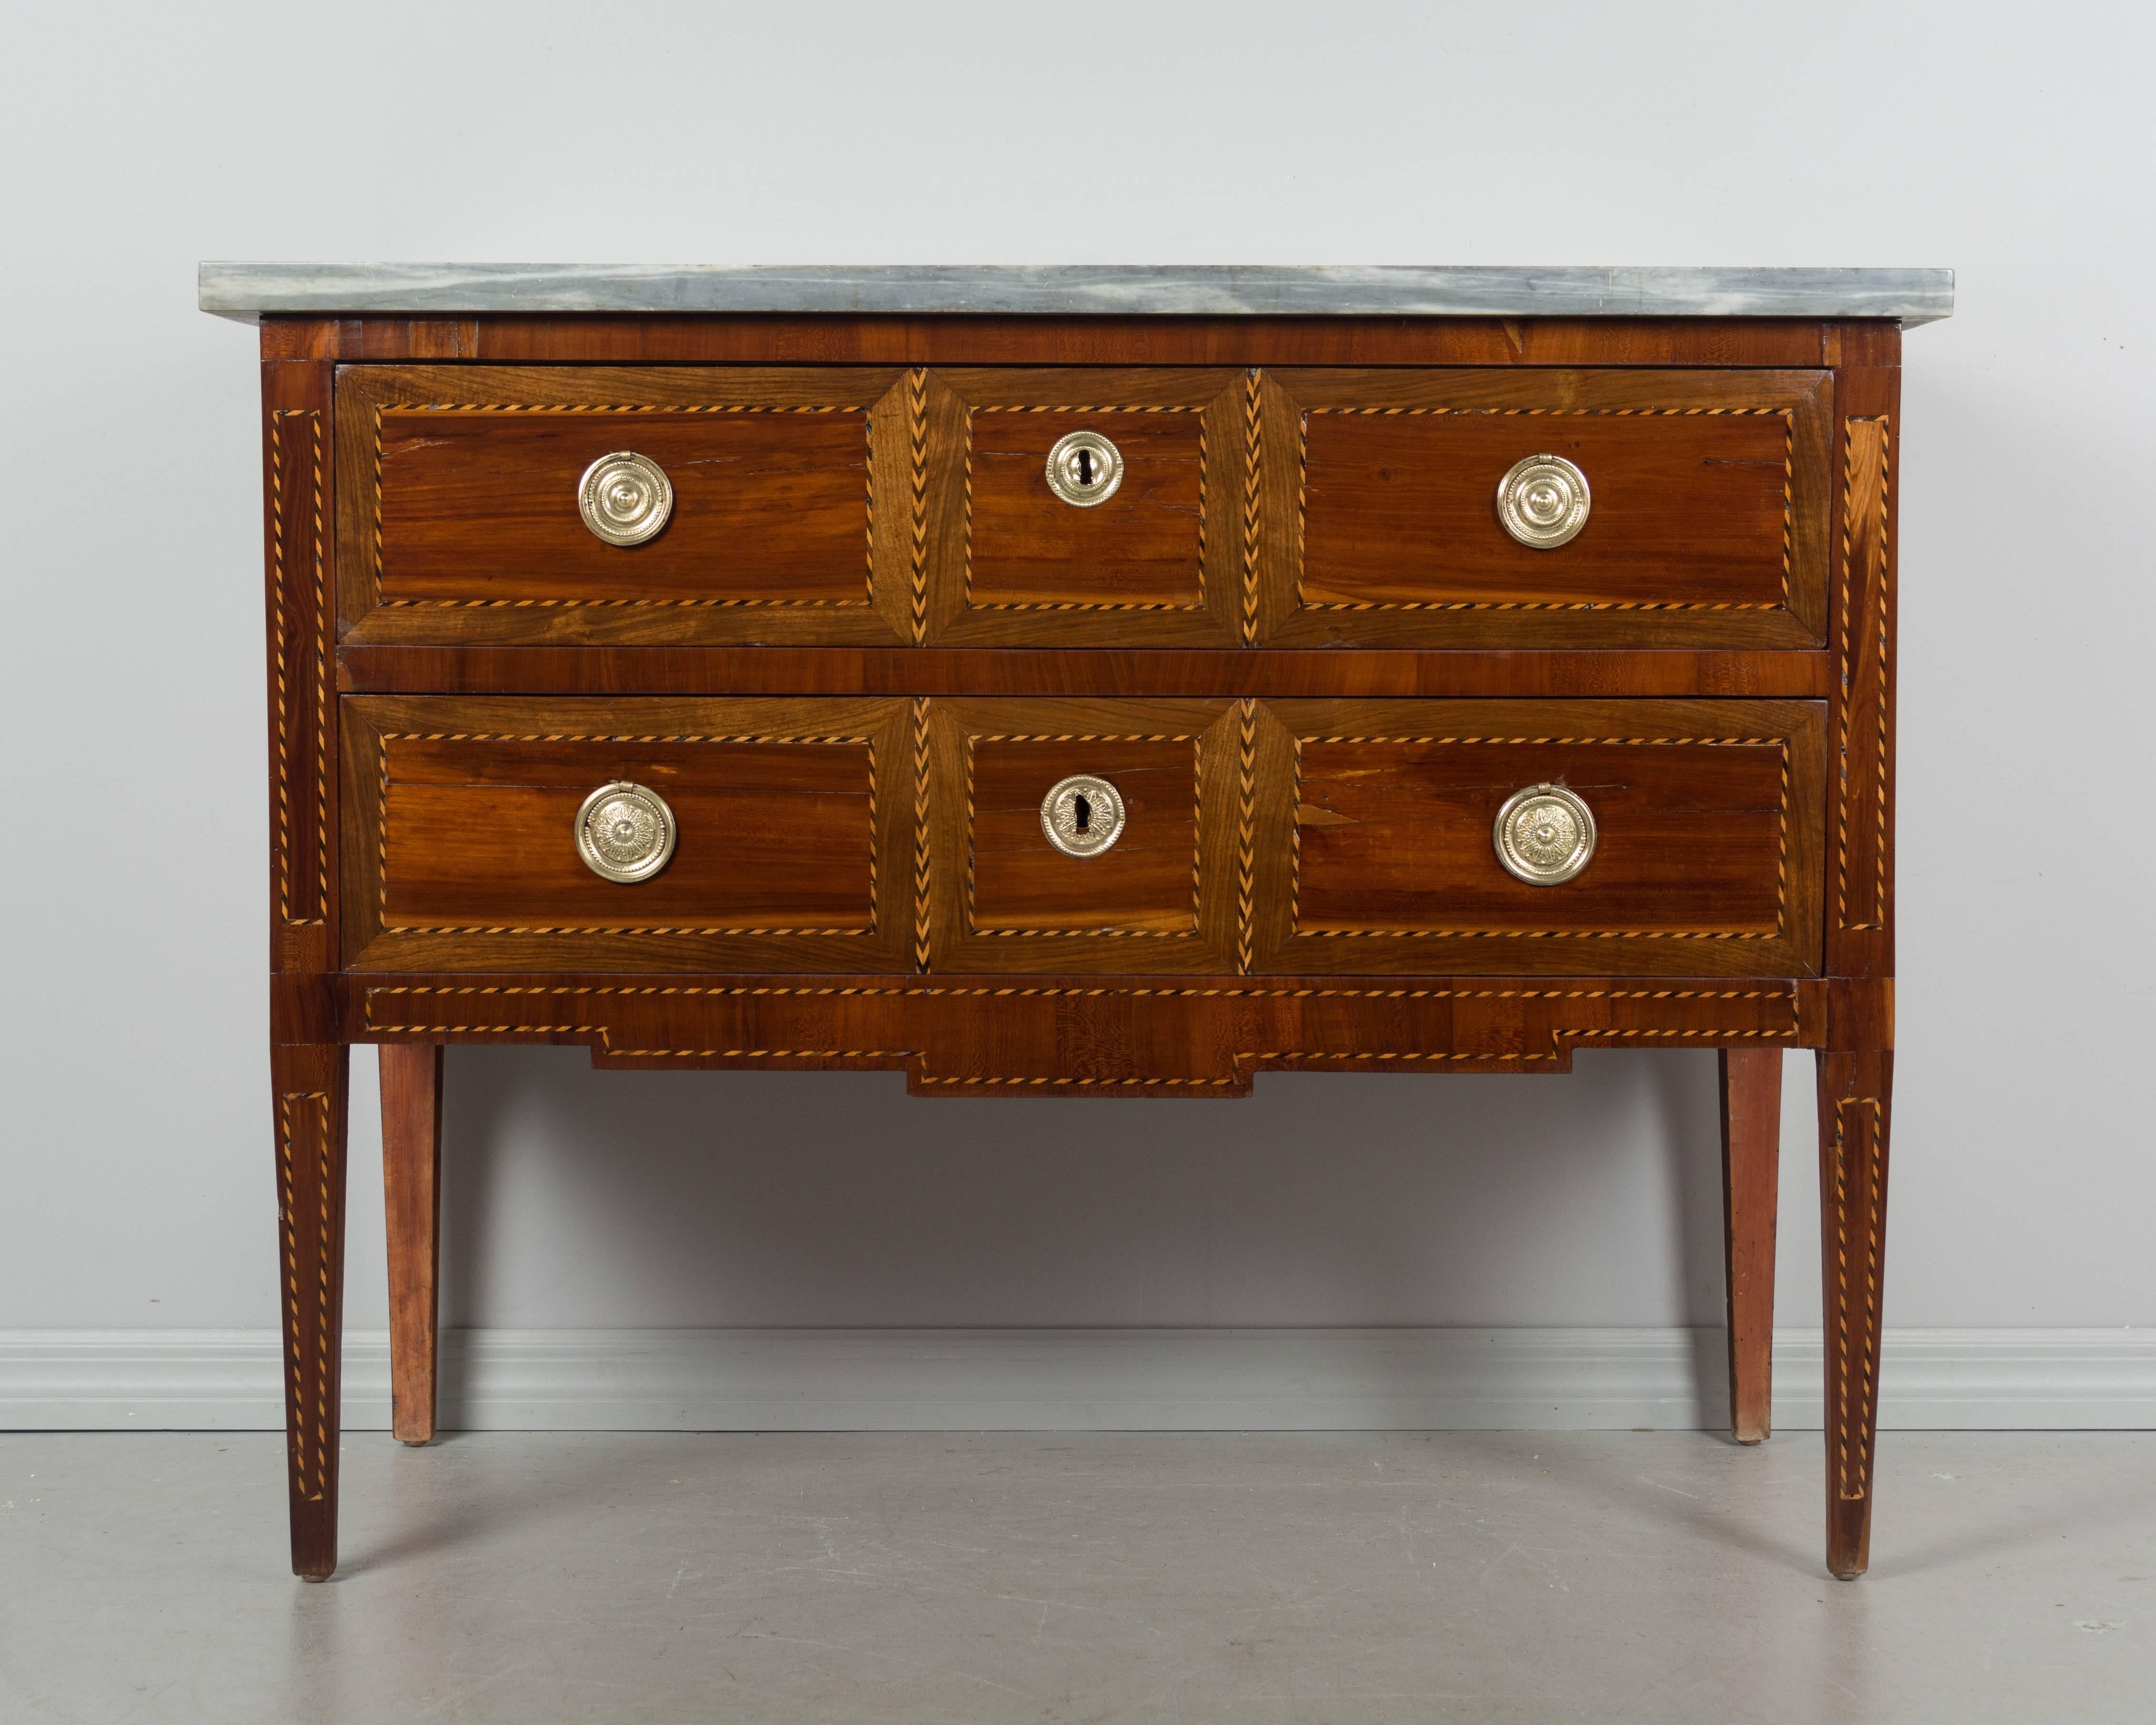 18th century French Louis XVI marquetry commode with veneers of mahogany, walnut and cherry. Nice proportions with slender tapered legs. Pegged construction with mortise and tenon joints. French polish finish. Two dovetailed drawers with original